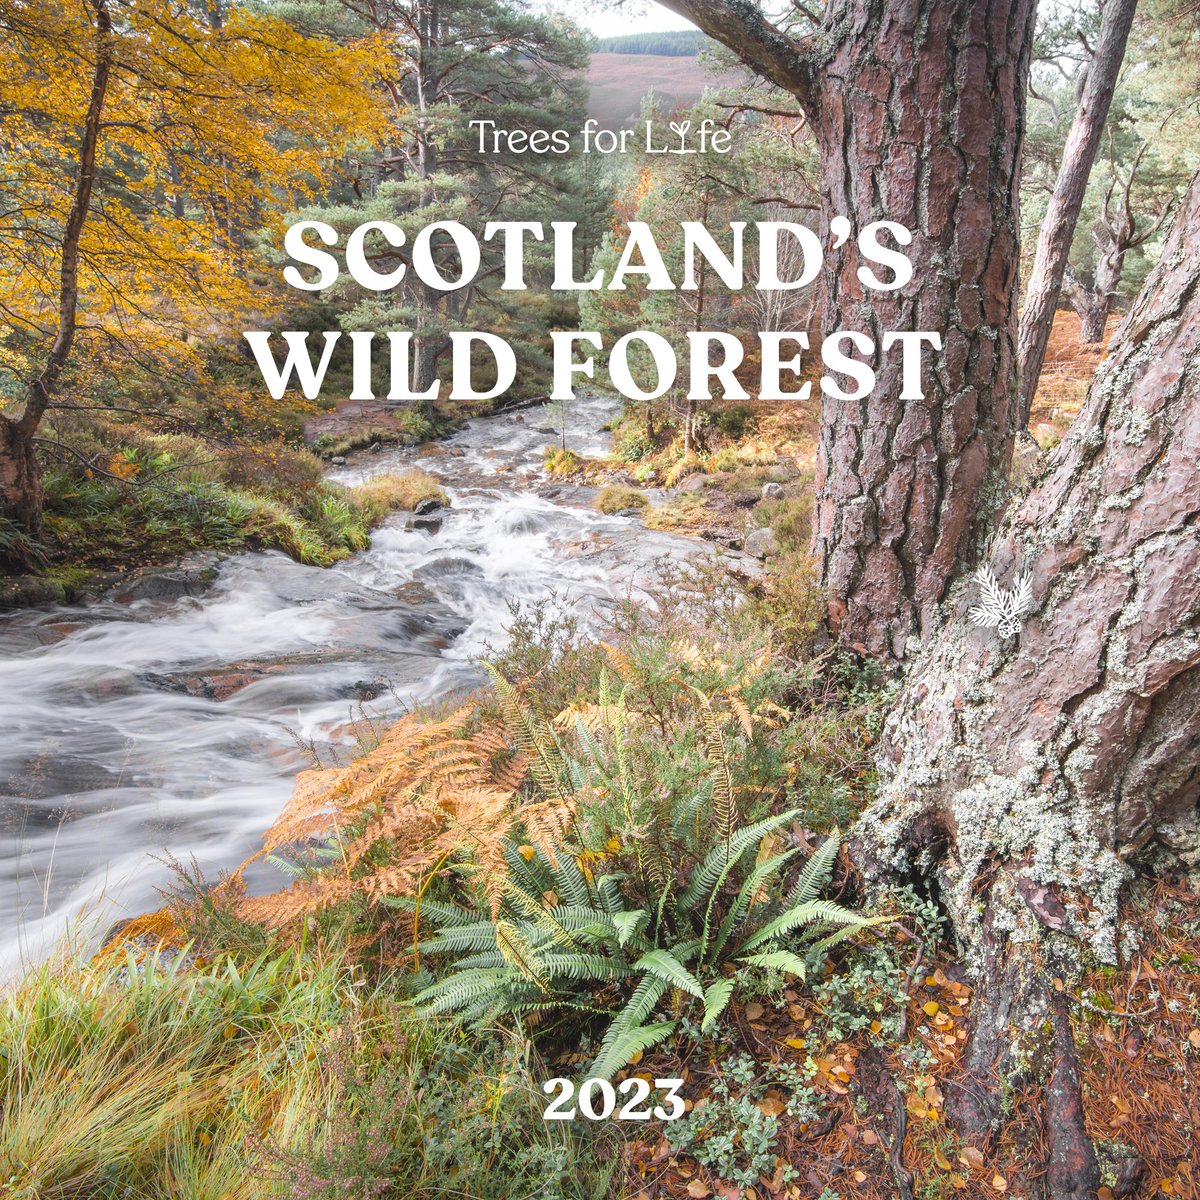 Our 2023 Scotland’s Wild Forest Calendar is now available to pre-order! Each month features a beautiful photograph of the Scottish Highlands, from a soaring birch tree to a perching red squirrel. Visit our online shop today to place your order: treesforlife.org.uk/our-shop/